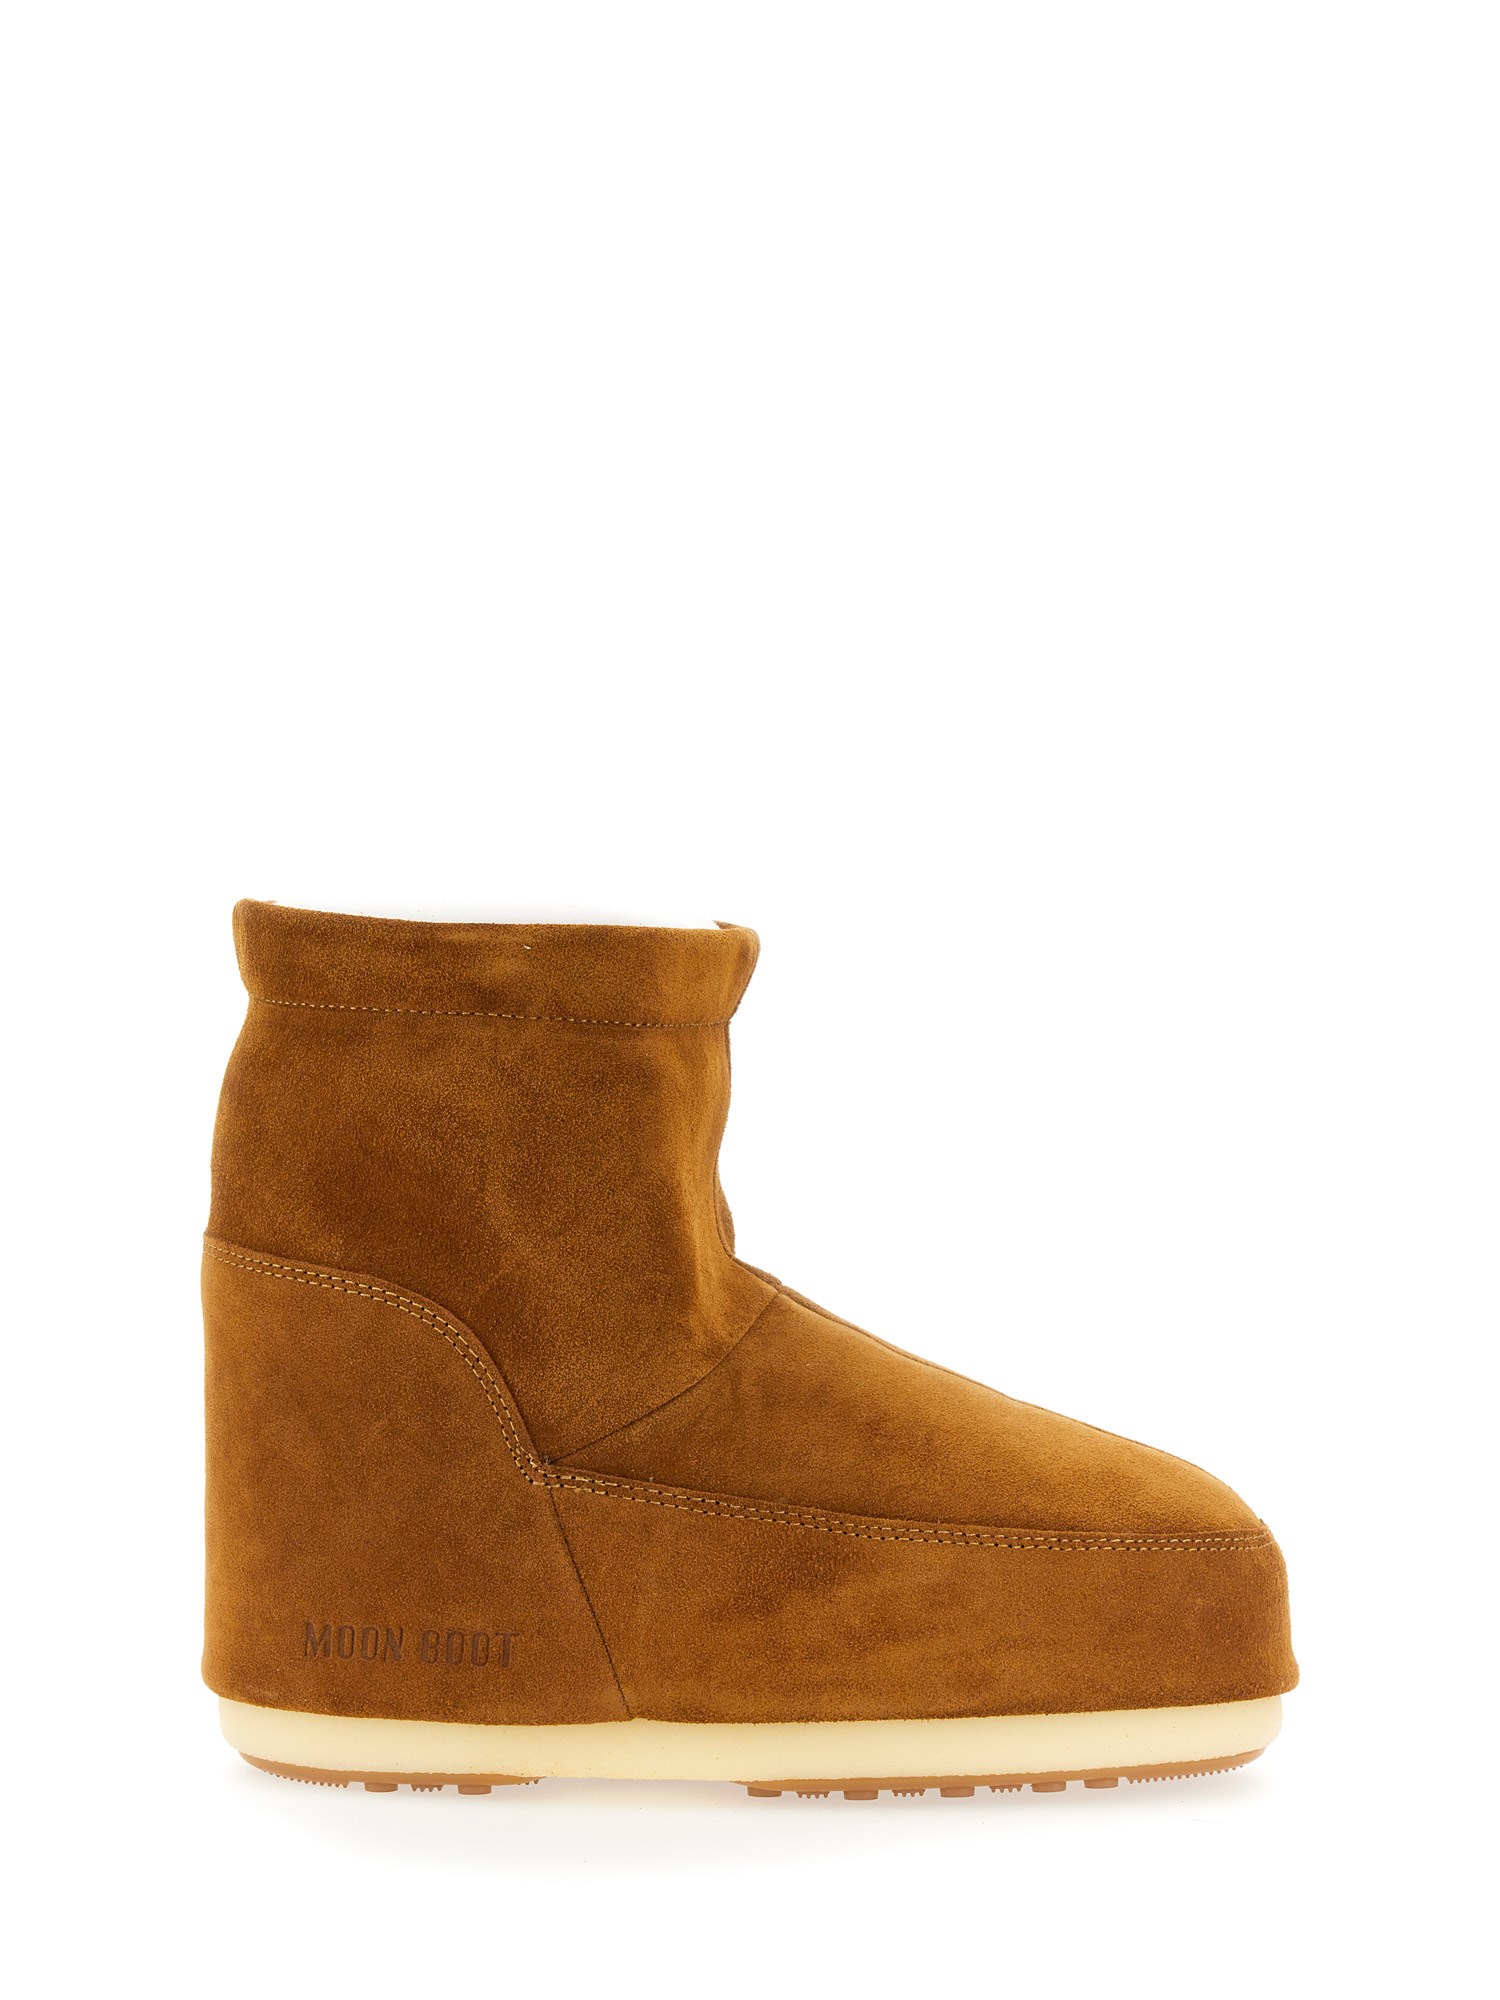 moon boot no lace tan suede boots